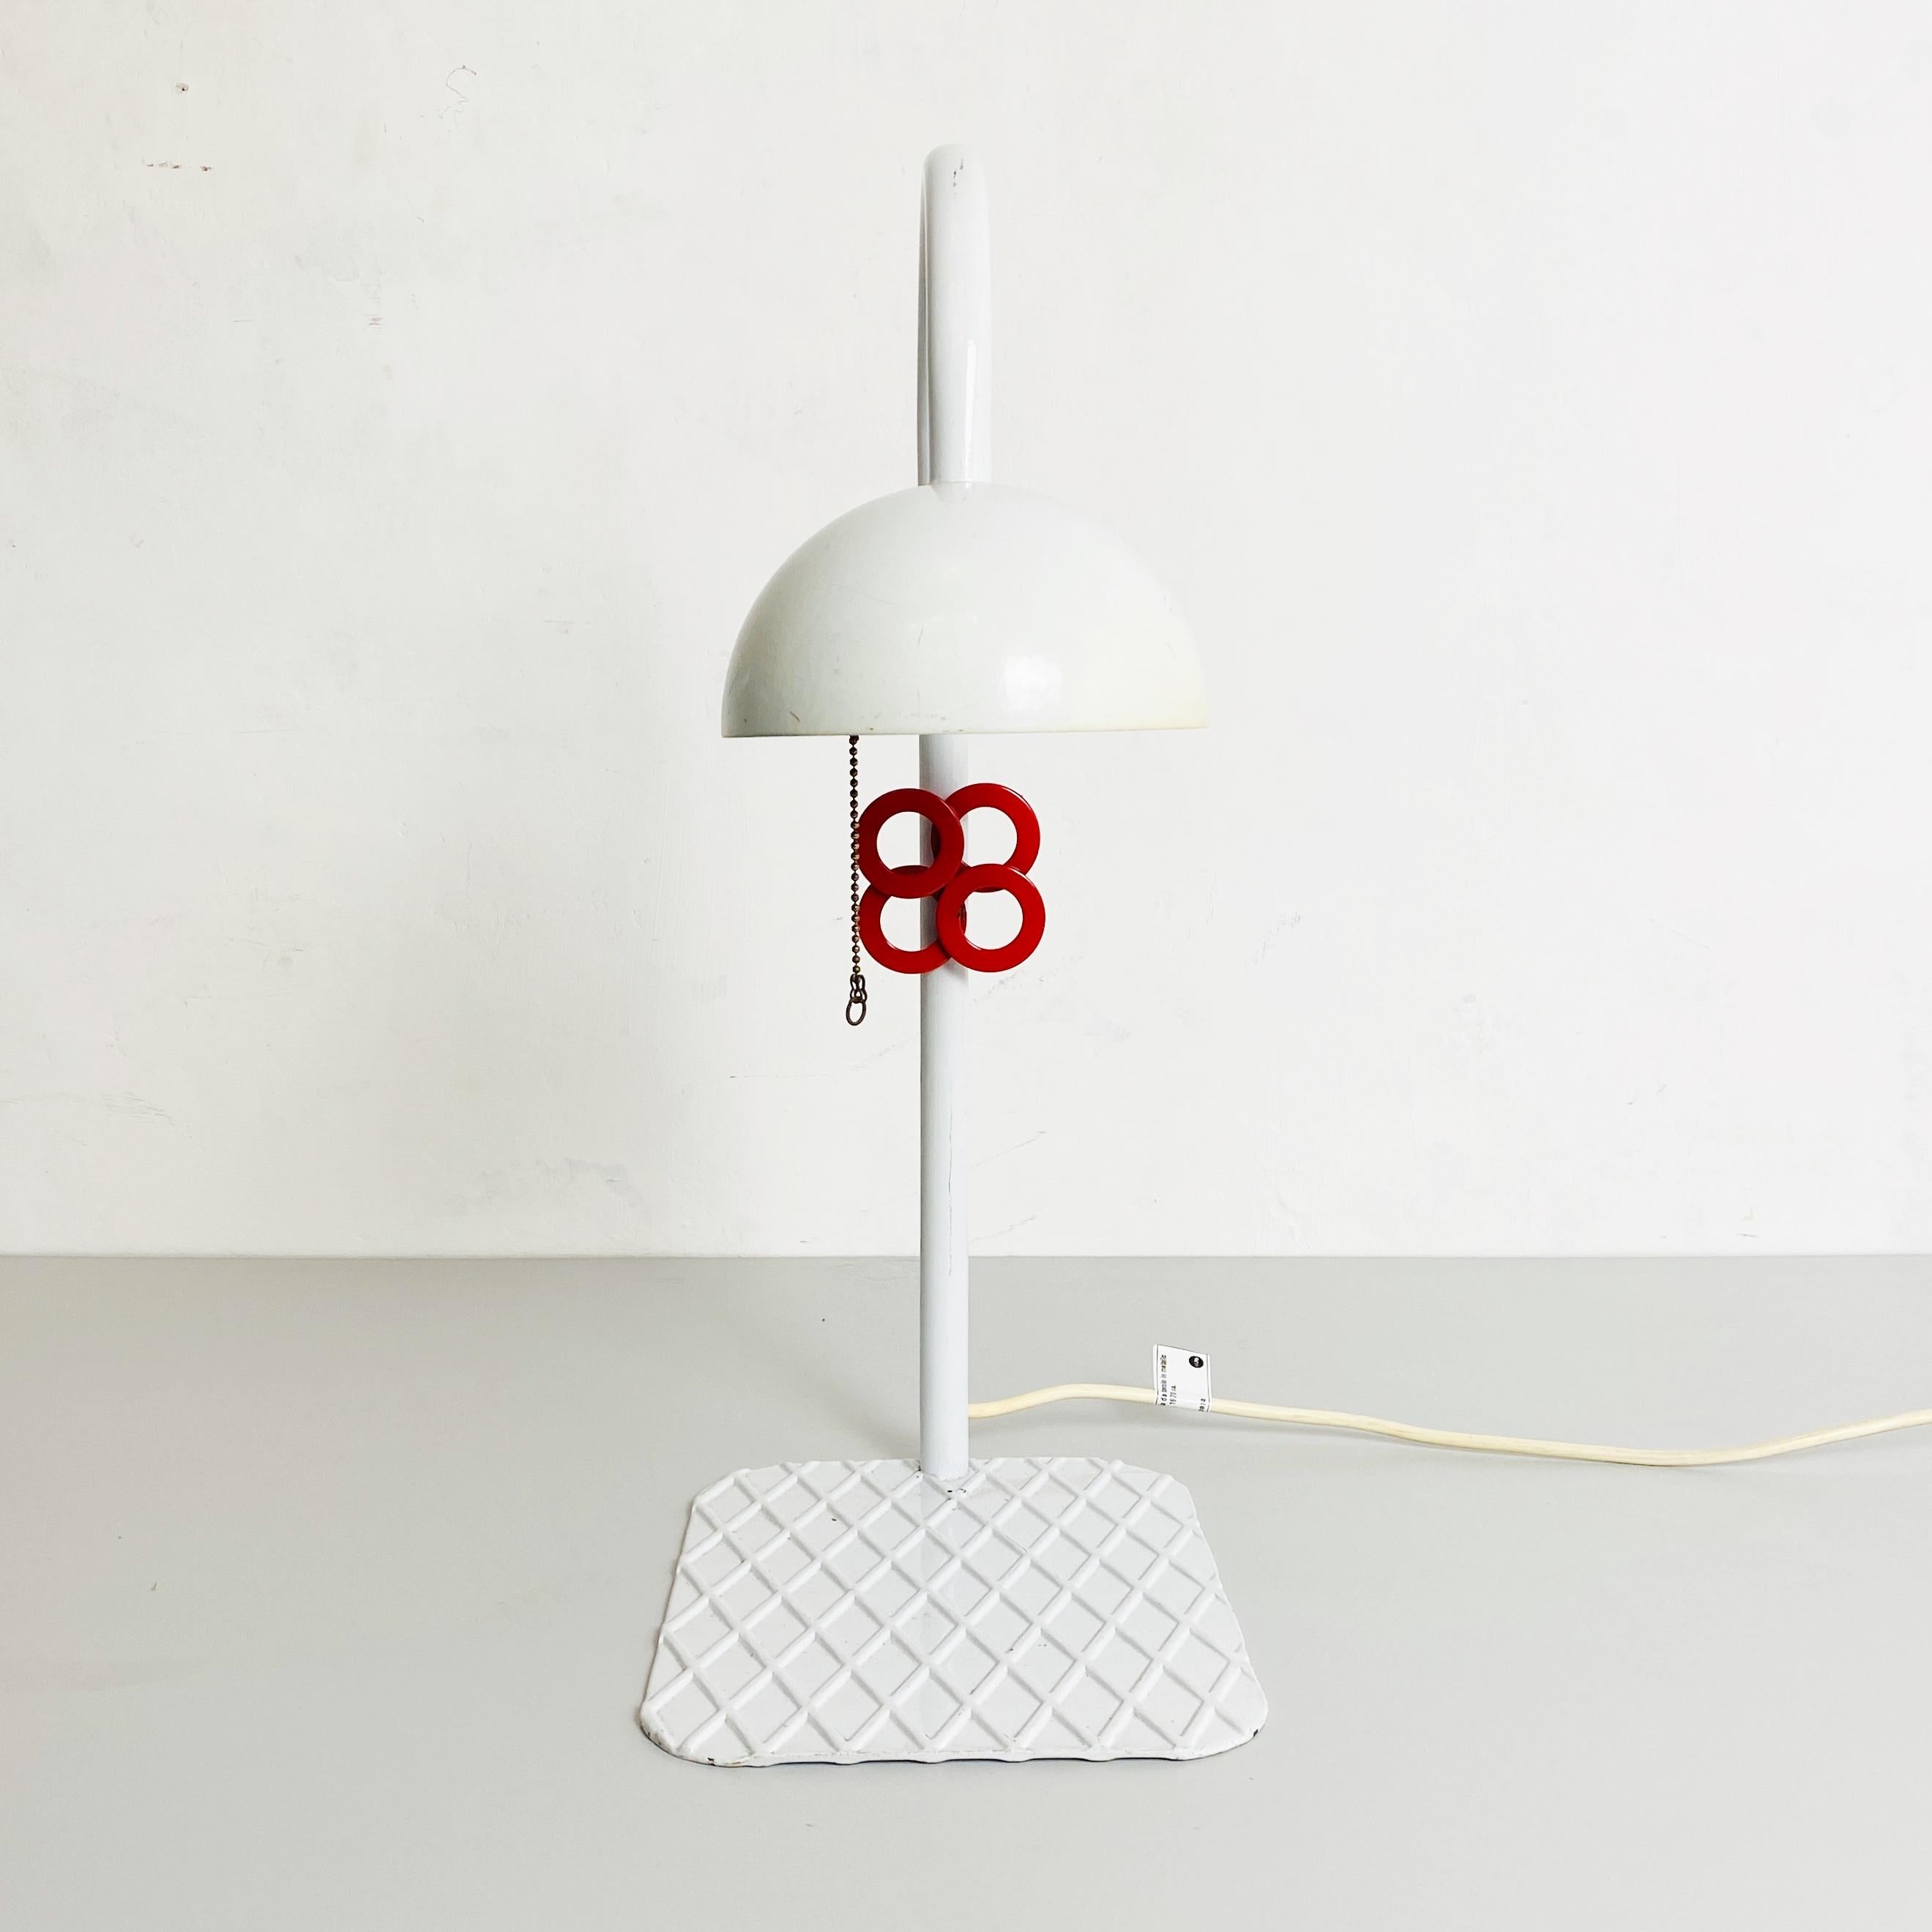 Late 20th Century Italian Mid-Century Modern White Metal Table Lamp by L'isola Che Non C'è, 1980s For Sale